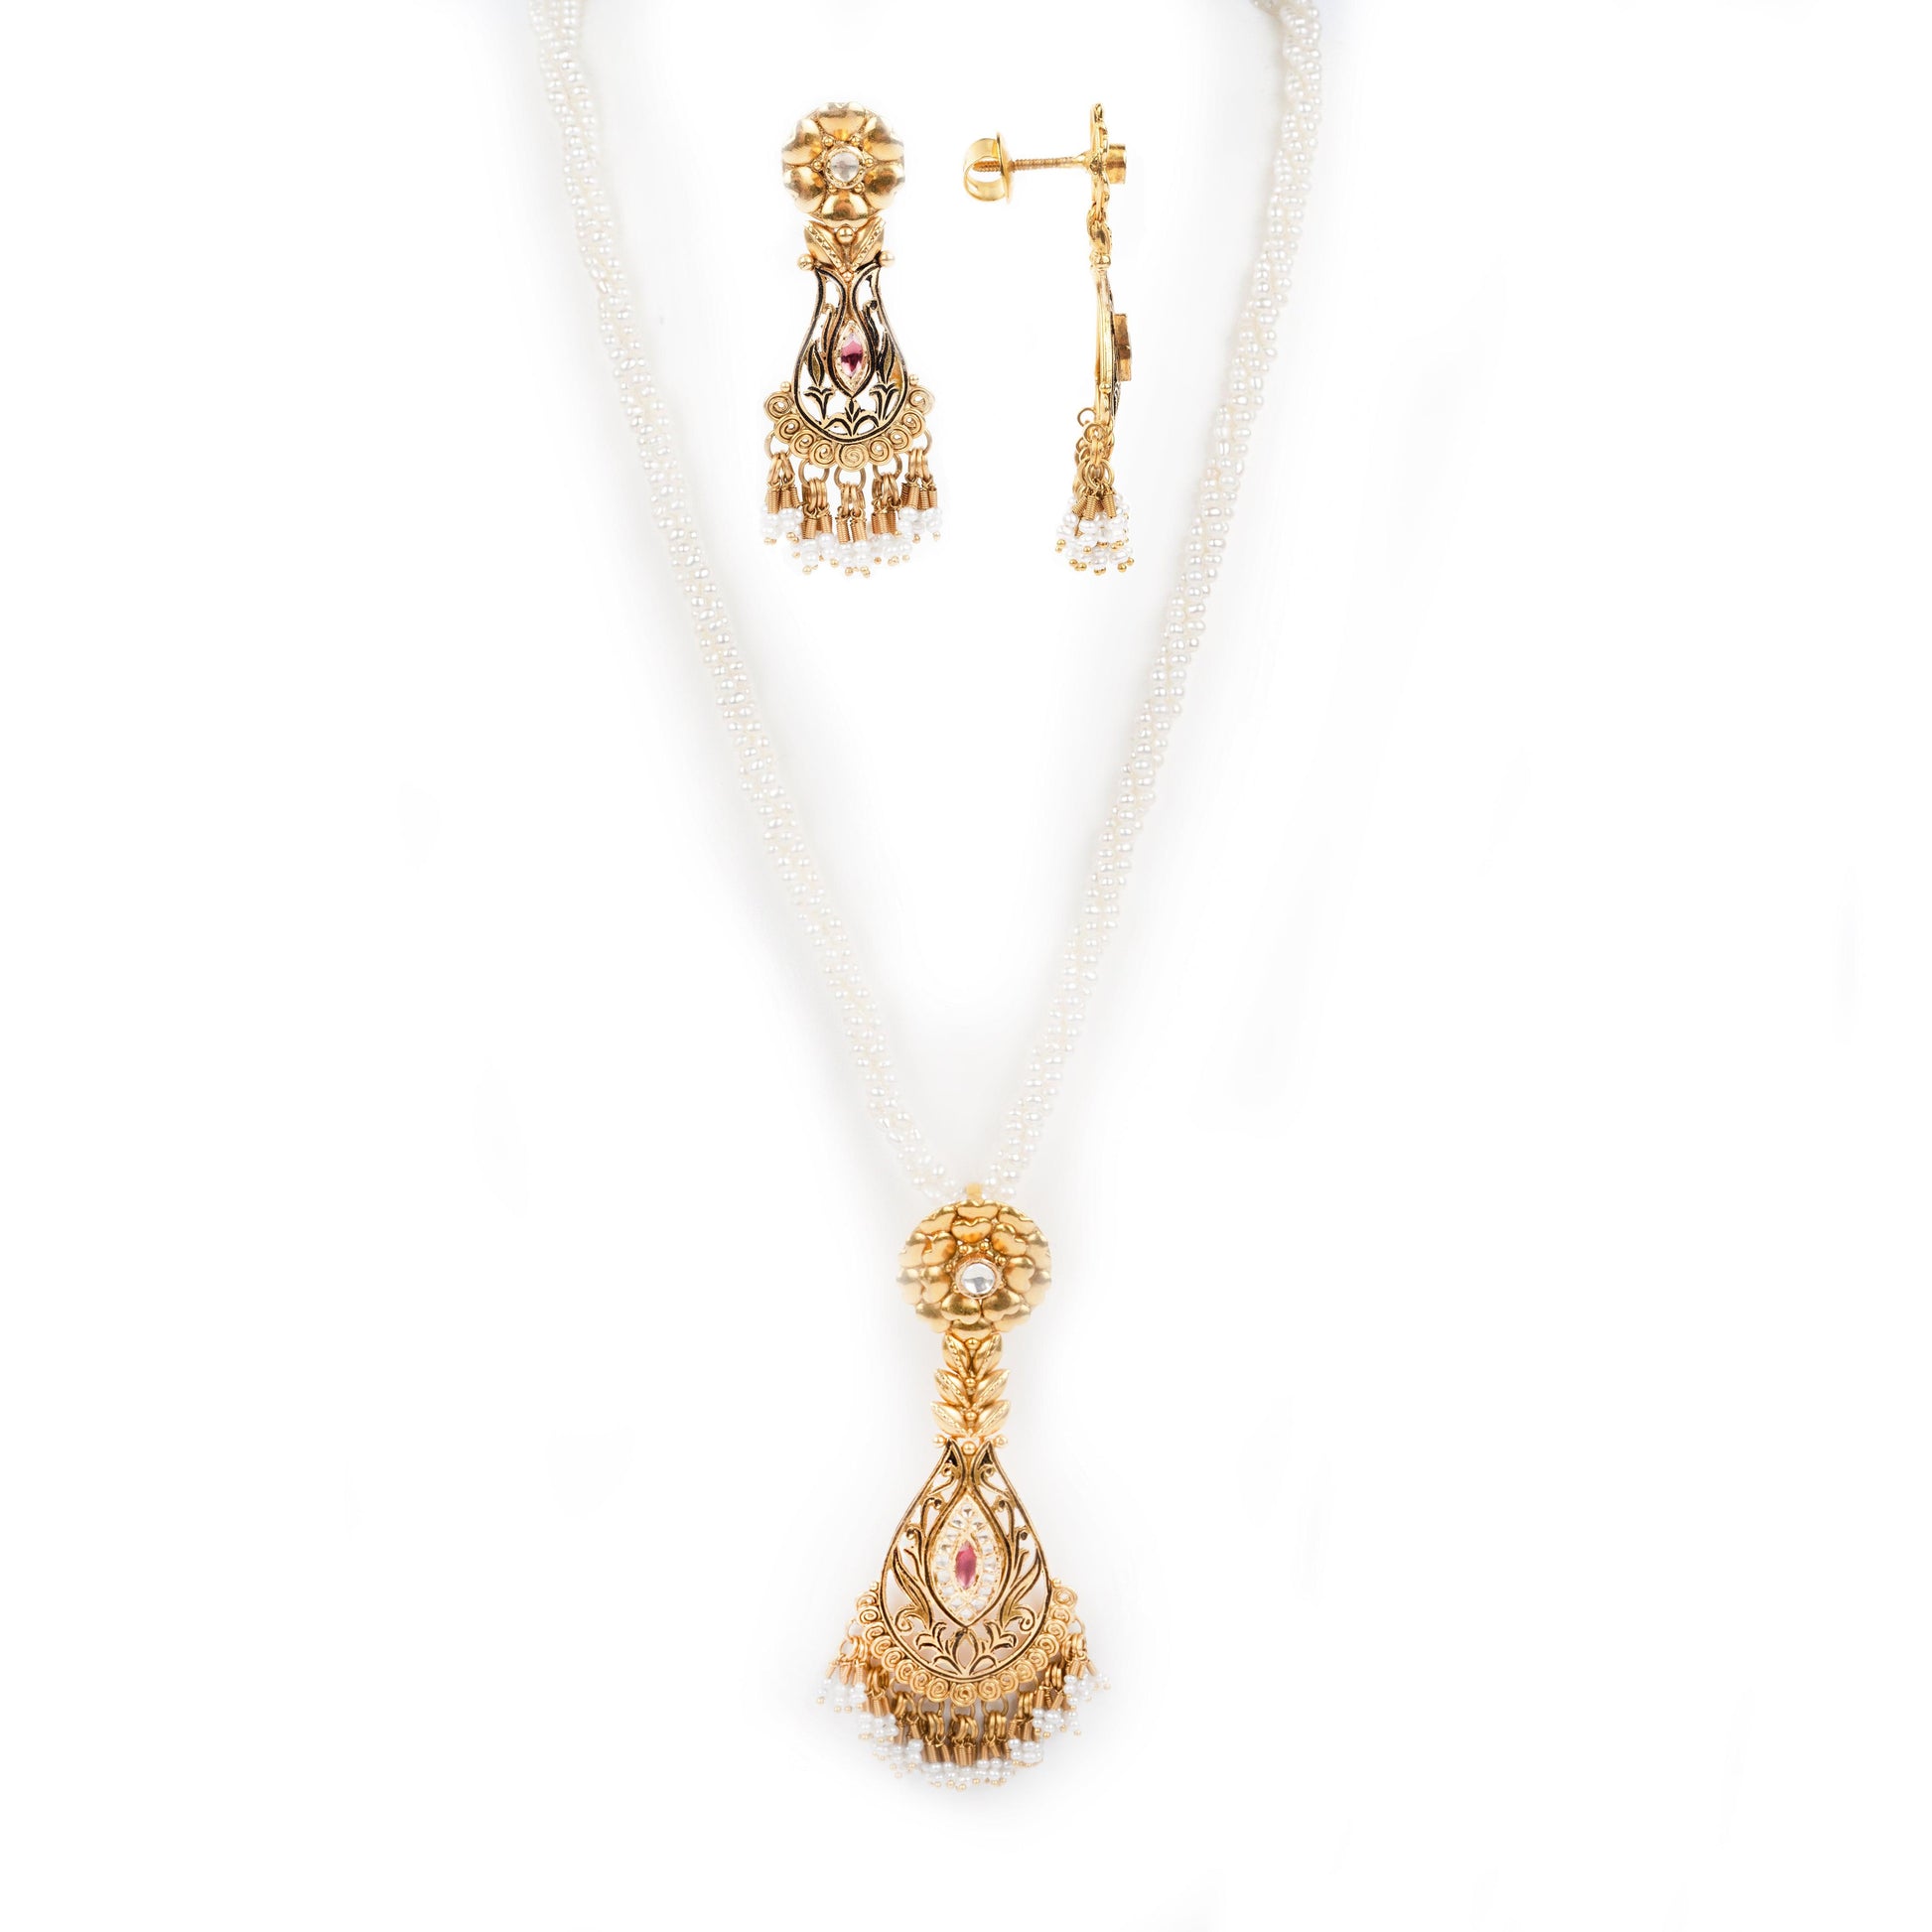 22ct Gold Antiquated Look Necklace, Pendant and Earrings set with Pearls (37.6g) N&P&E-4607 - Minar Jewellers